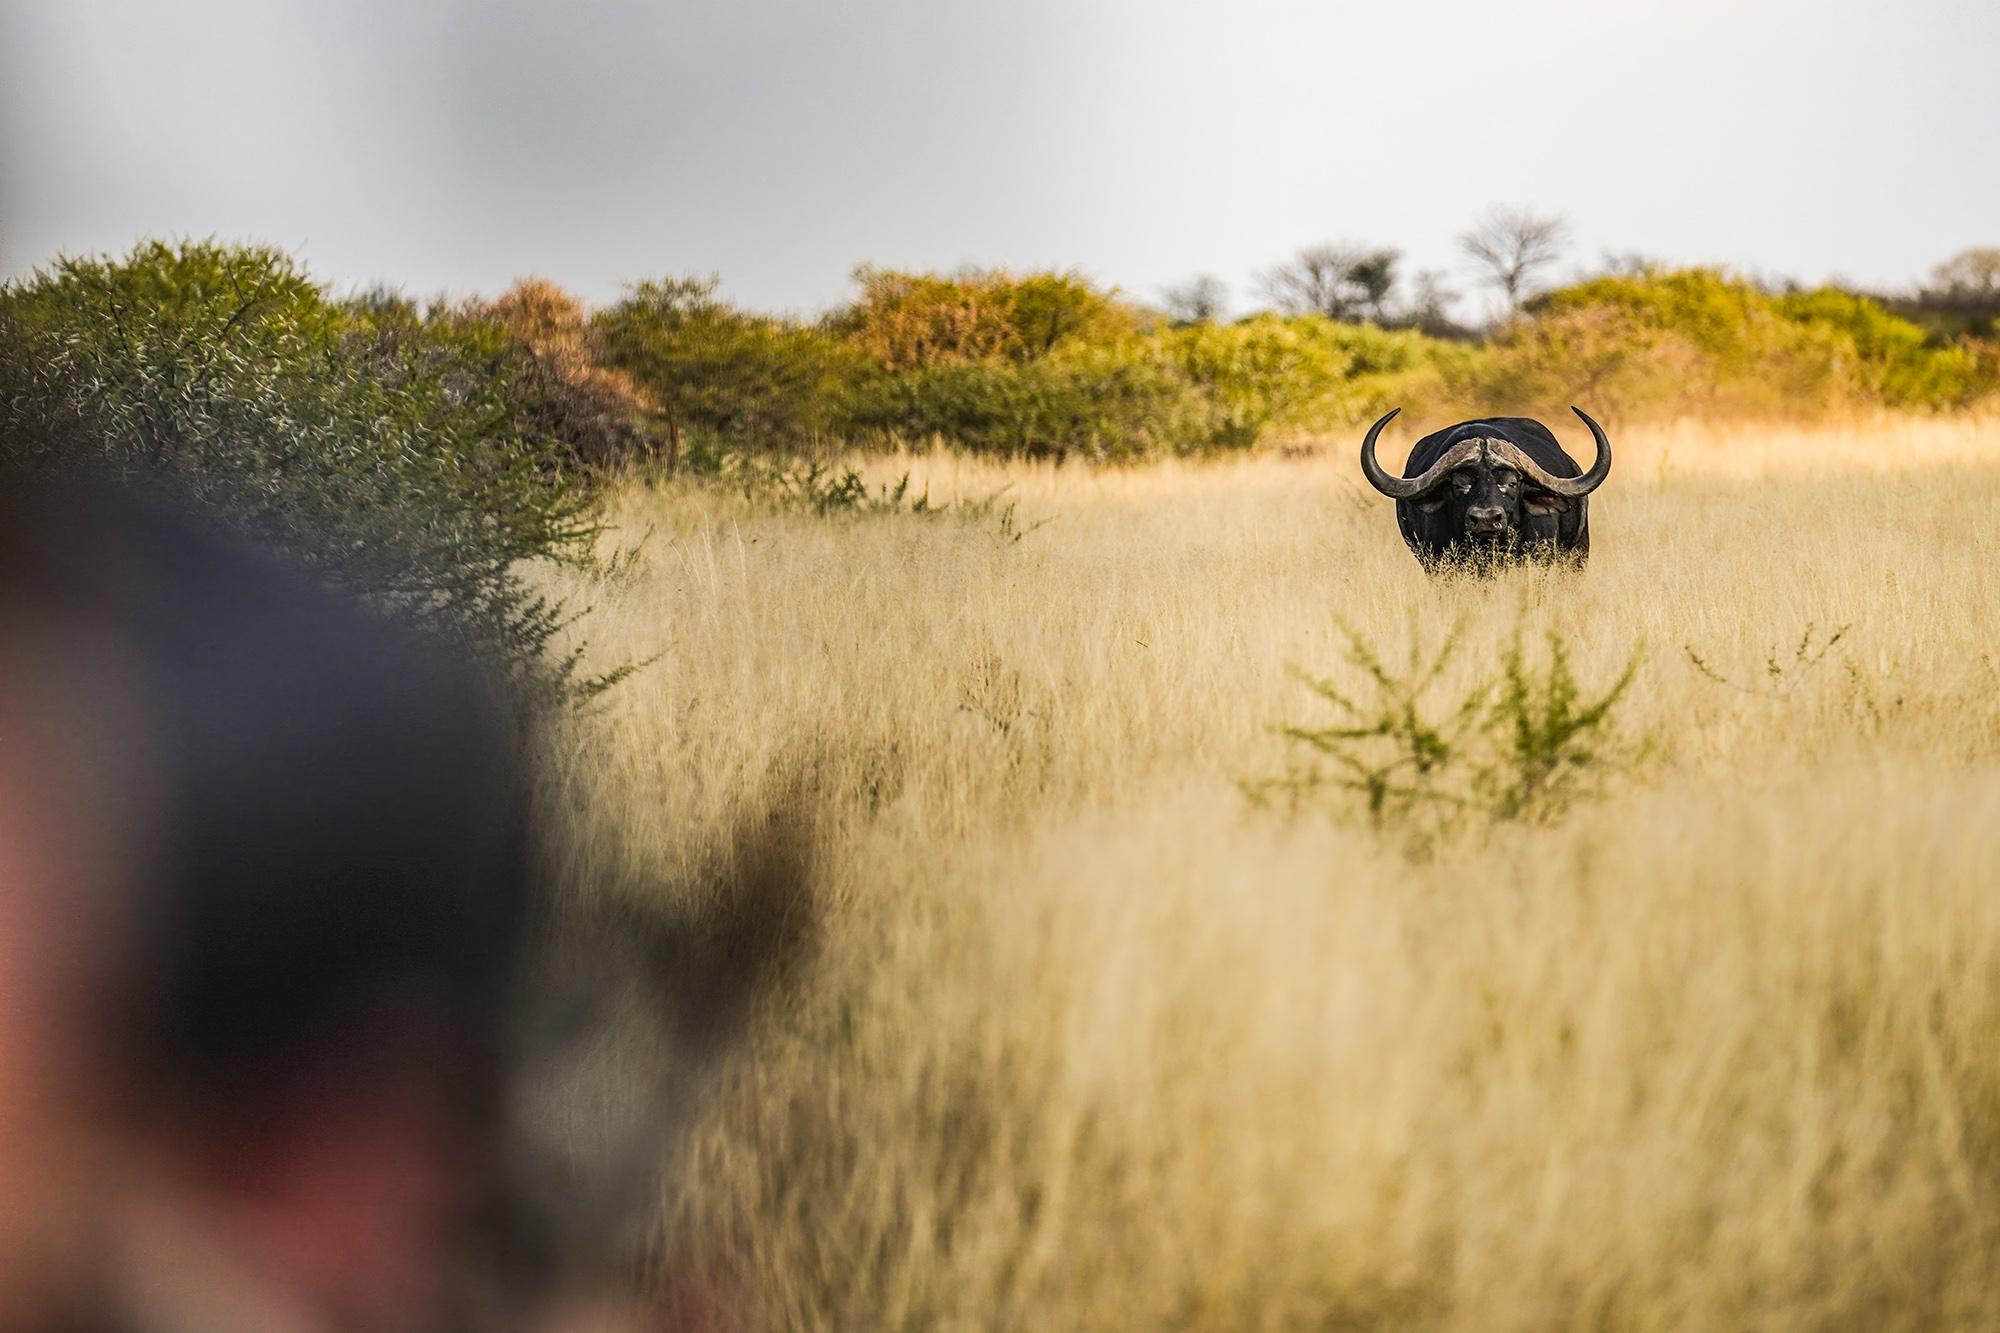 A cape buffalo charging a hunter in the foreground.